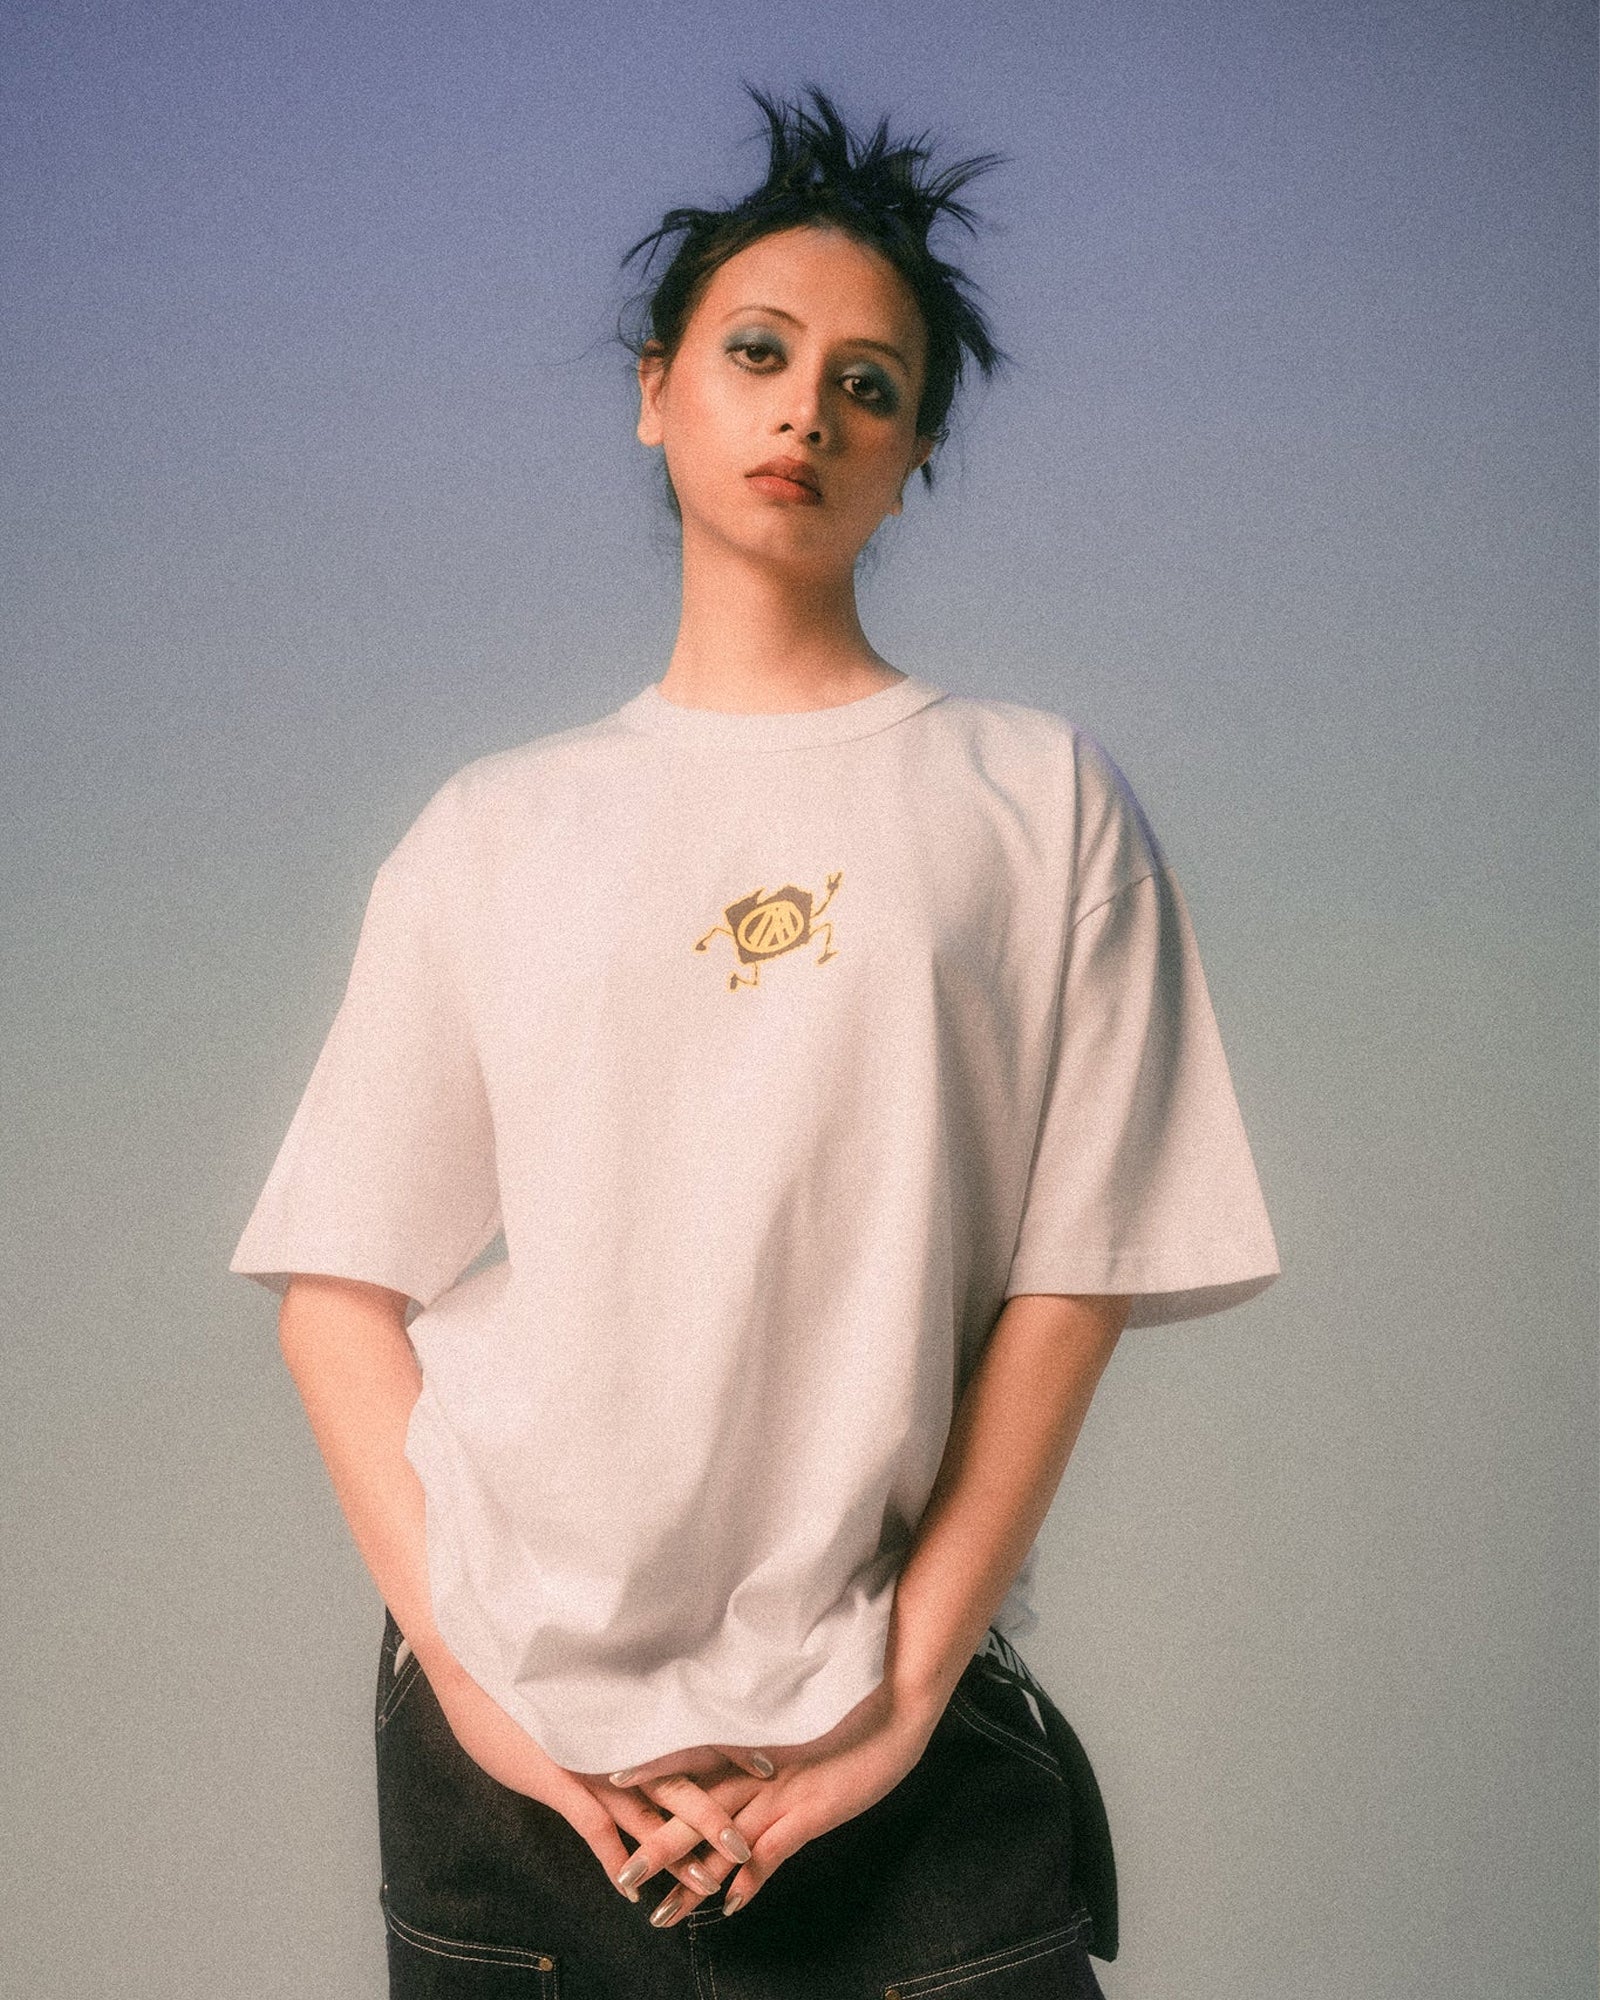 A Eckhaus Latta Shirt pictured on a model in front of a white background. The title of the product is Eckhaus Latta Eclipse Turtleneck - Stone and the image was taken by 199A®.